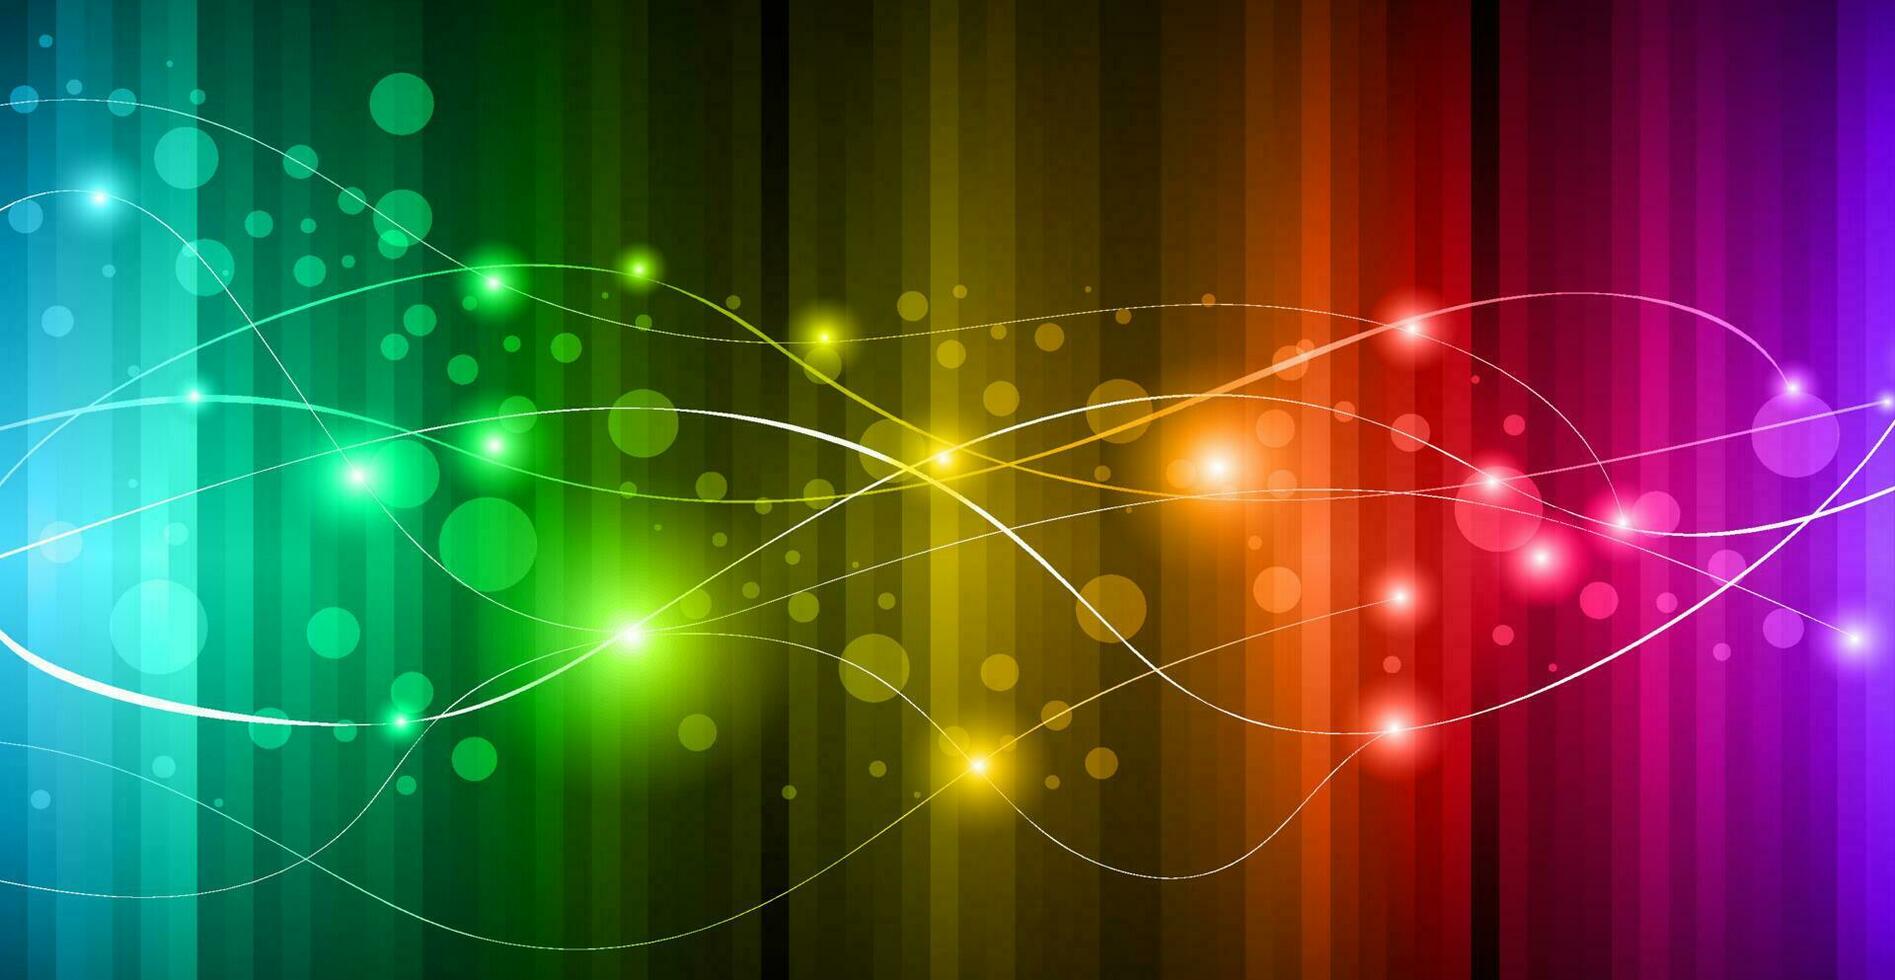 Abstract Christmas background. With colorful balls and Christmas lights. Vector illustration of a festive banner template.